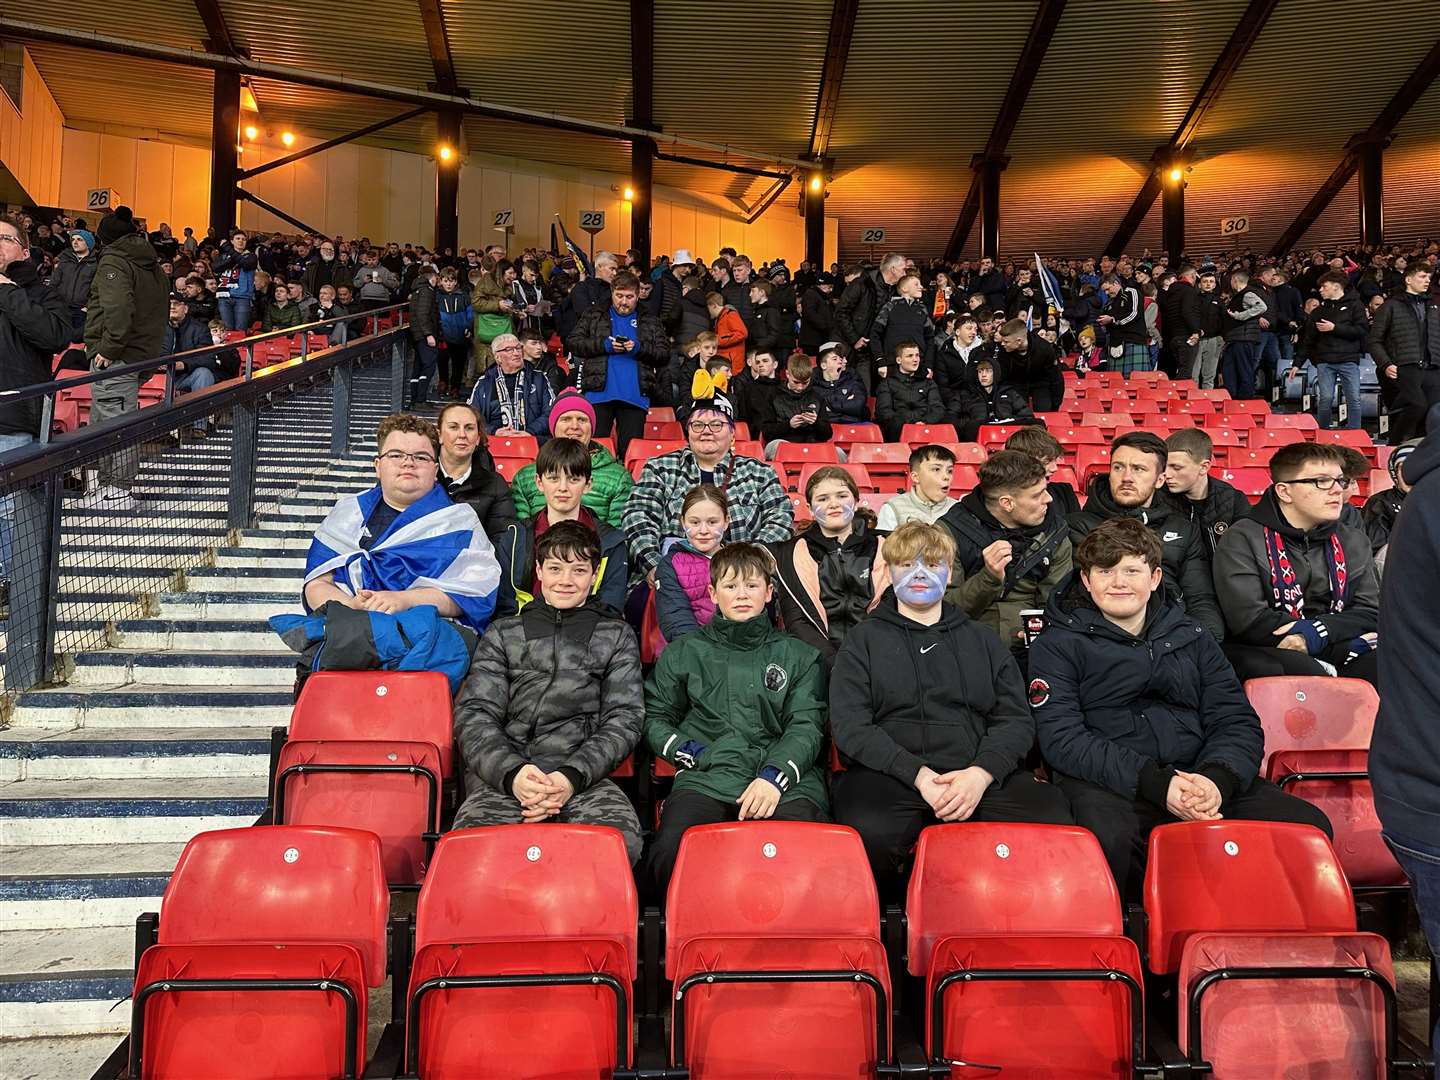 Ready to rain on Spain? KLB pupils had another grand day out in Glasgow.